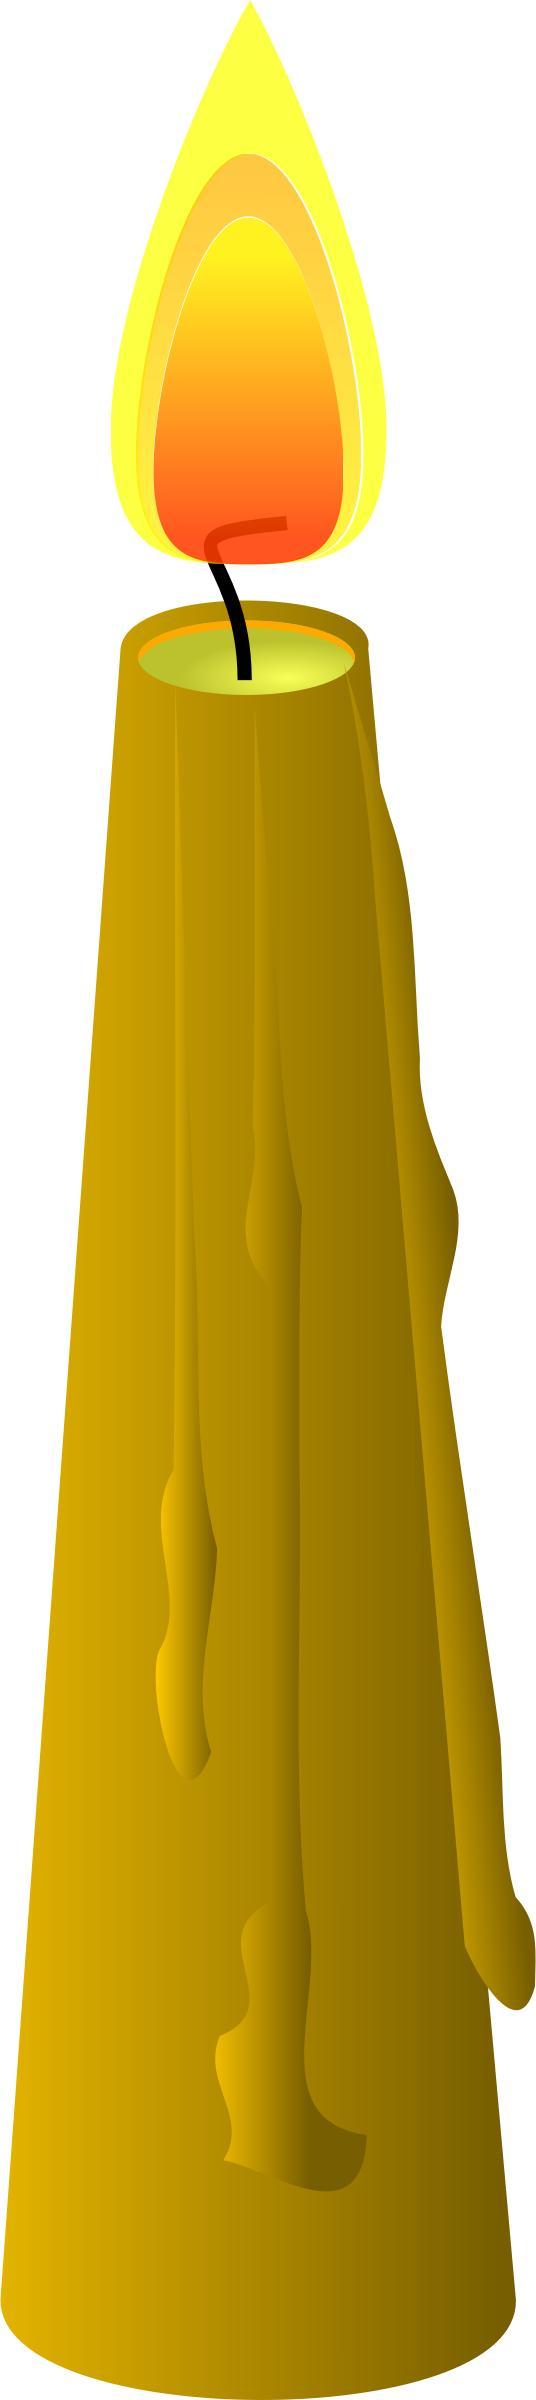 Beeswax Taper Candle png transparent